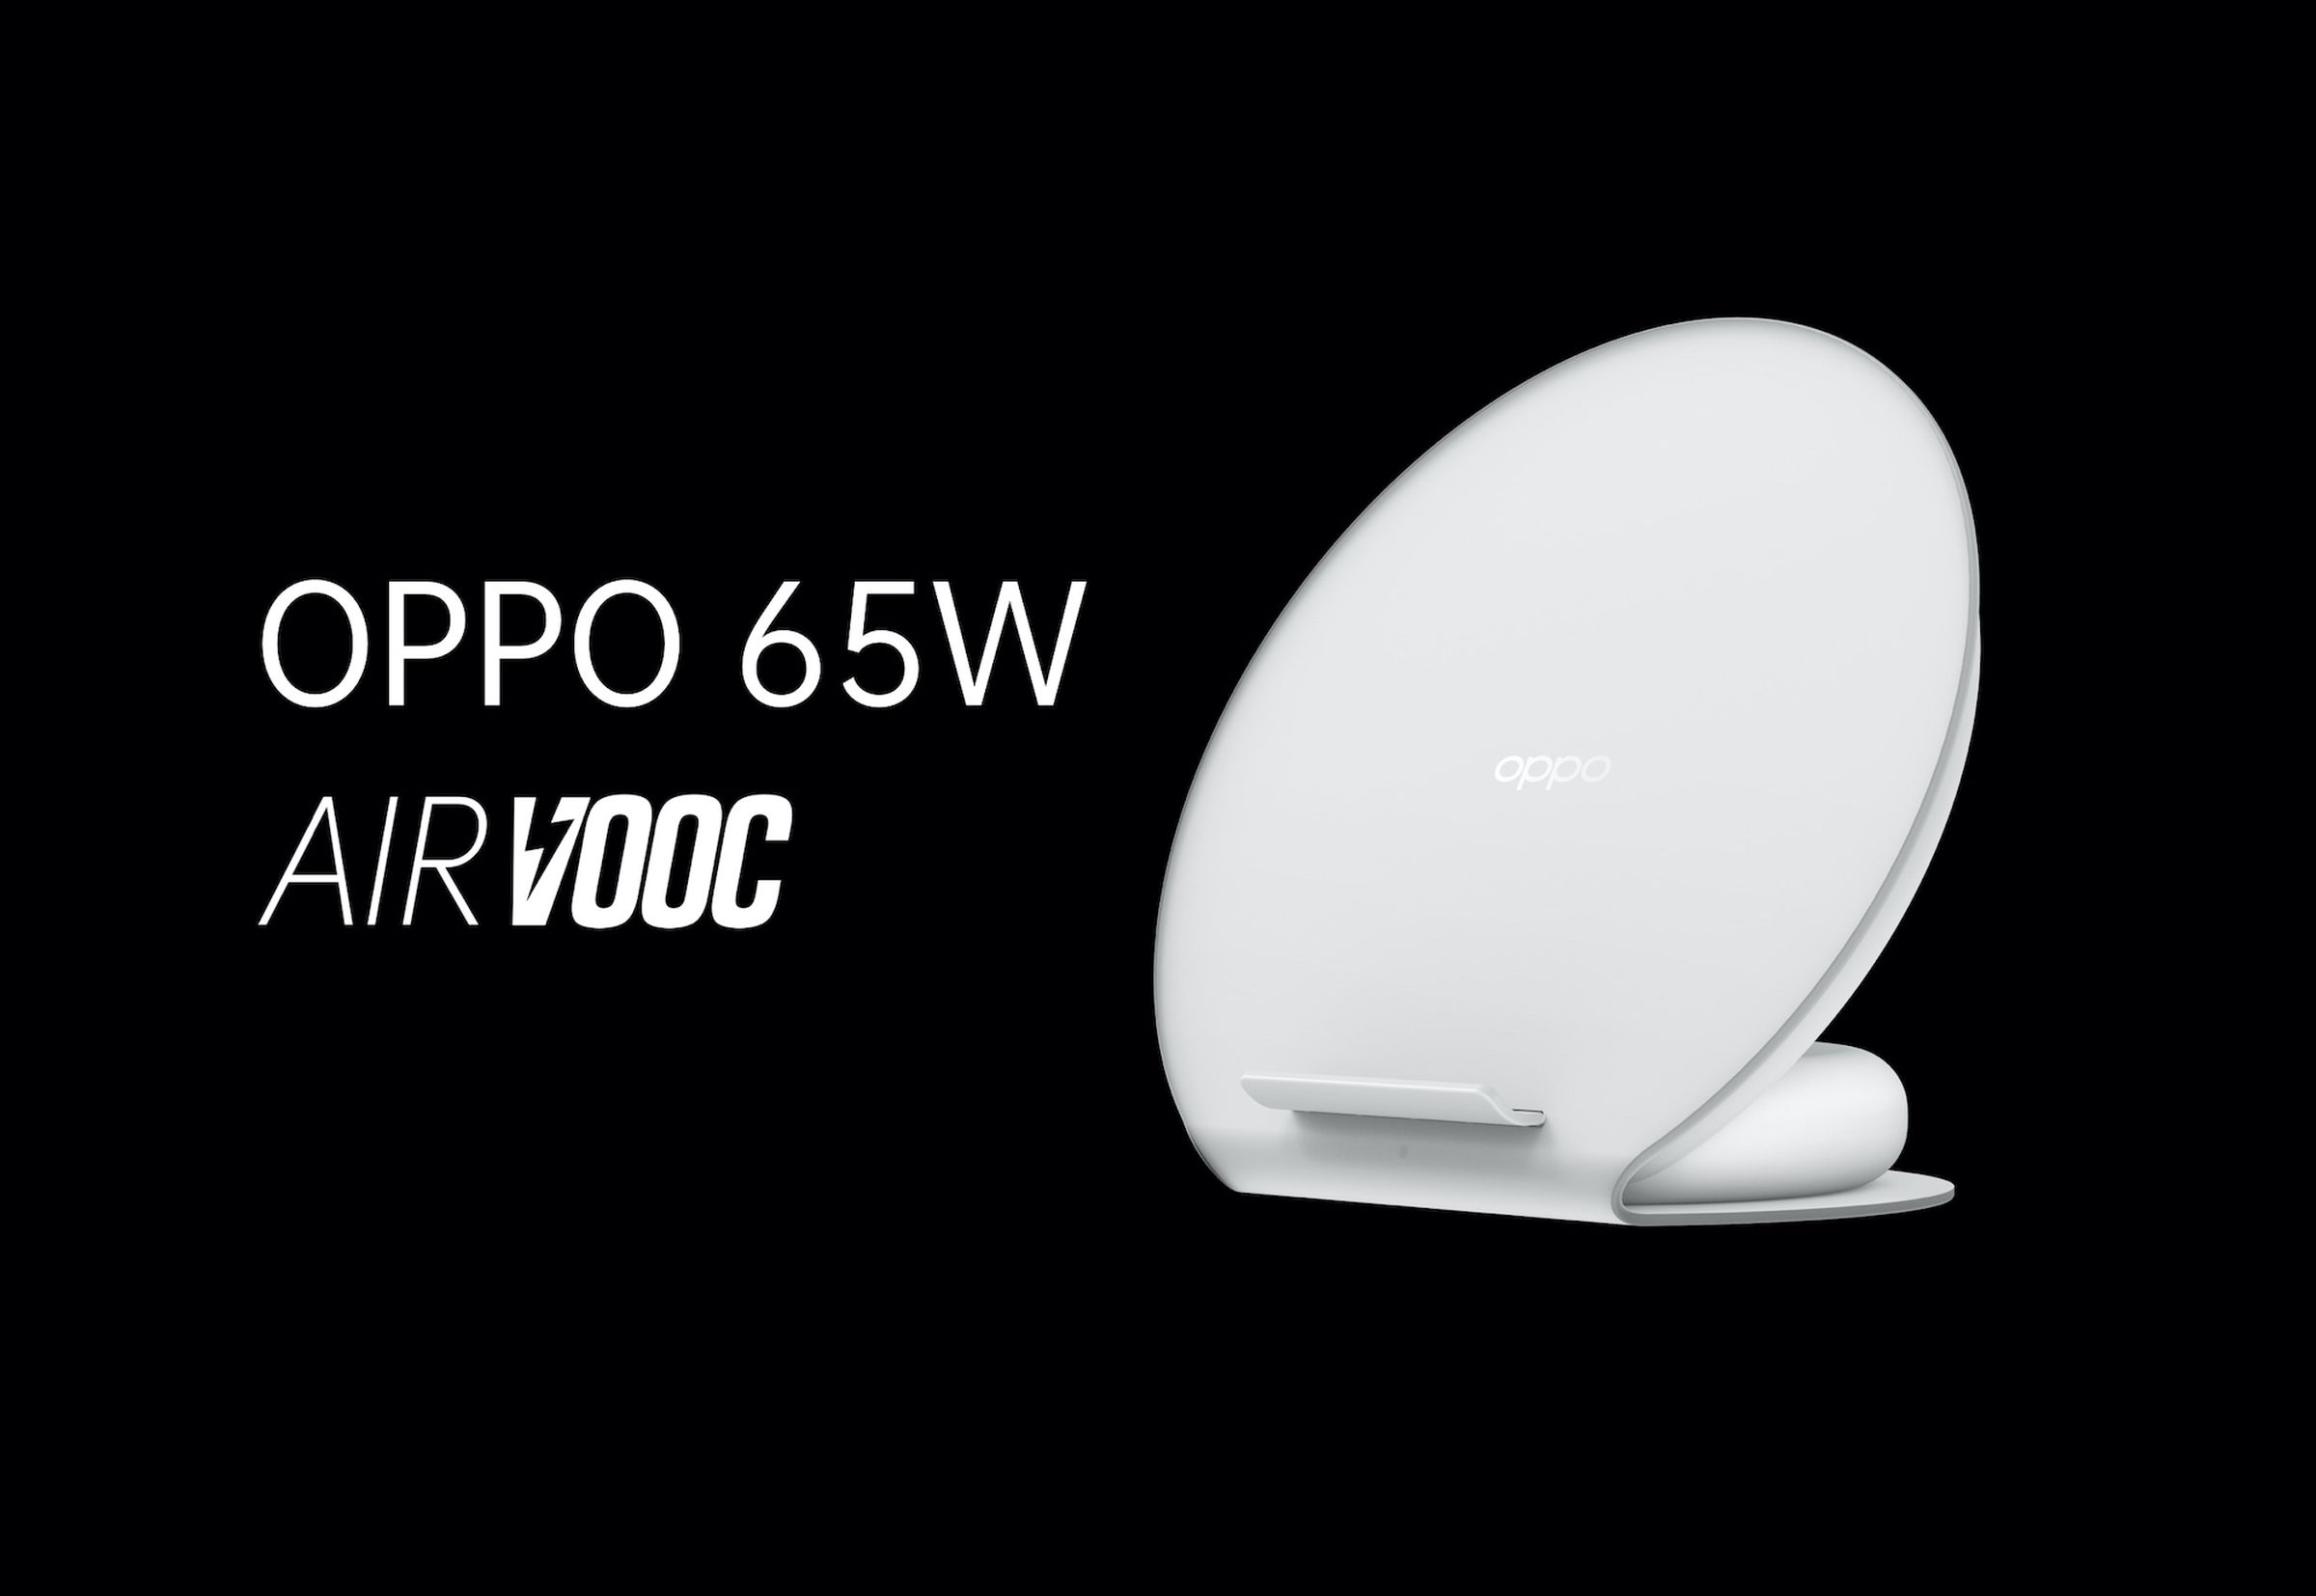 Oppo 65W AirVOOC charger.